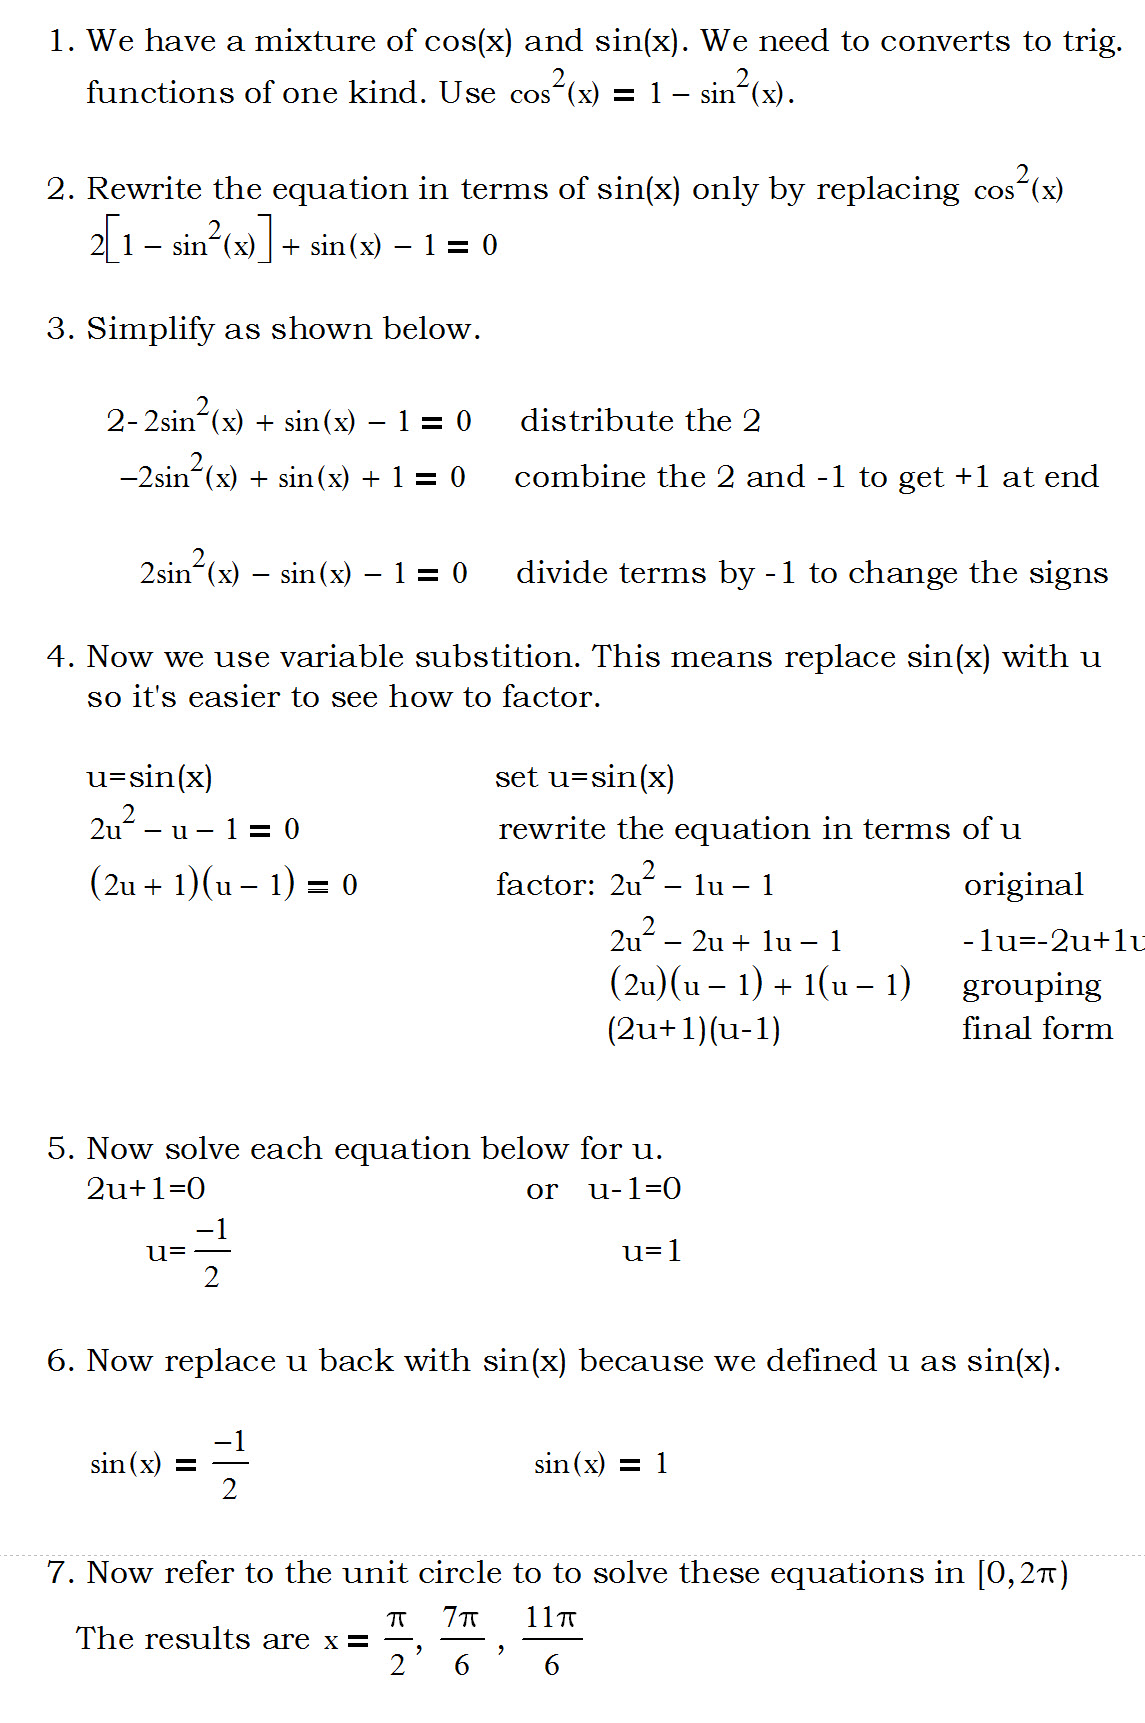 step by step example of solving a triggonometric equation